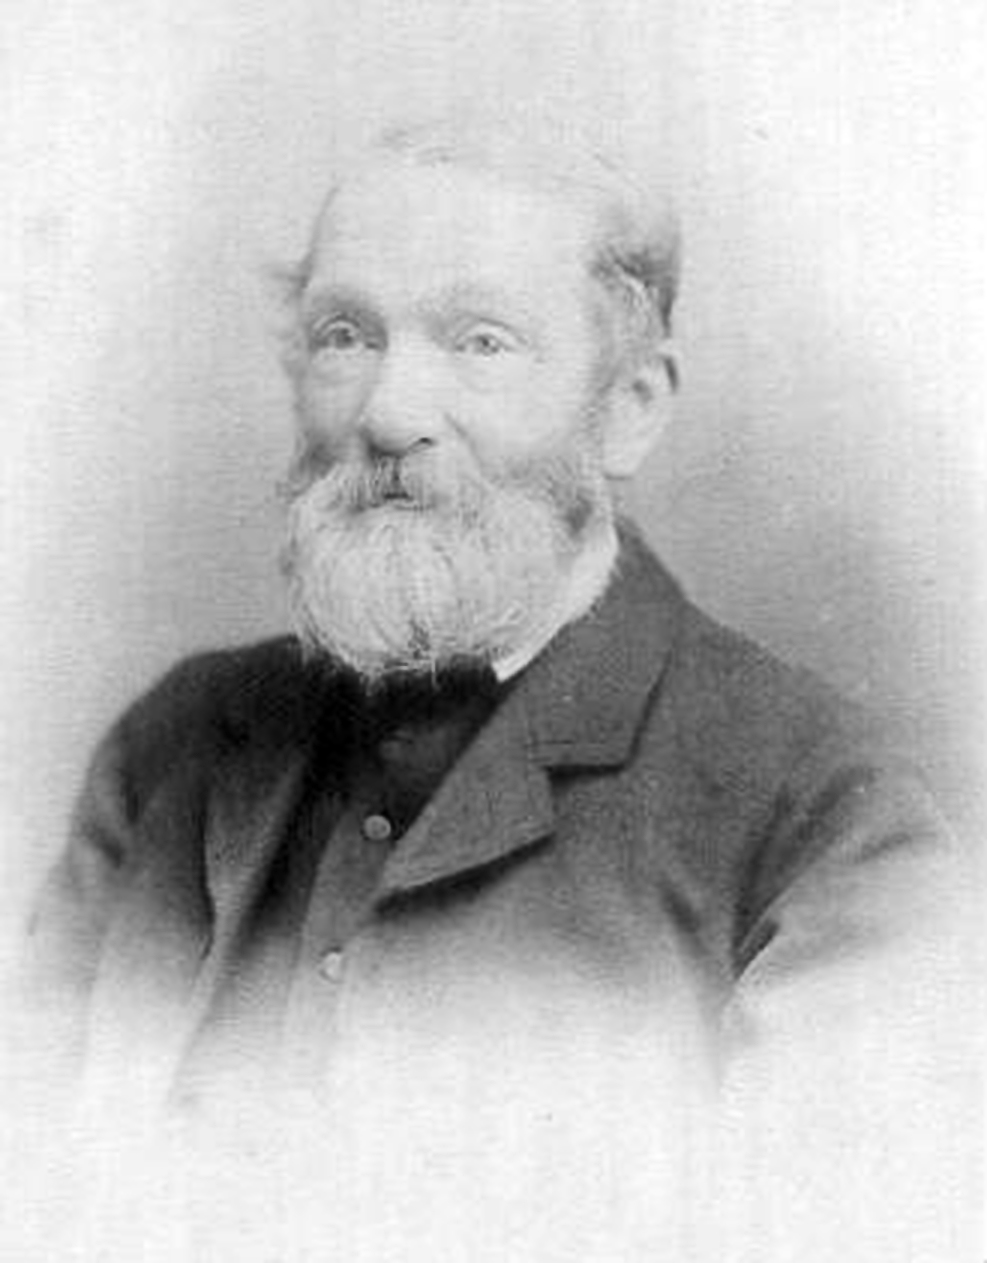 Photo of Herbert Birley kindly donated by Dave Birley at http://www.birley.org/